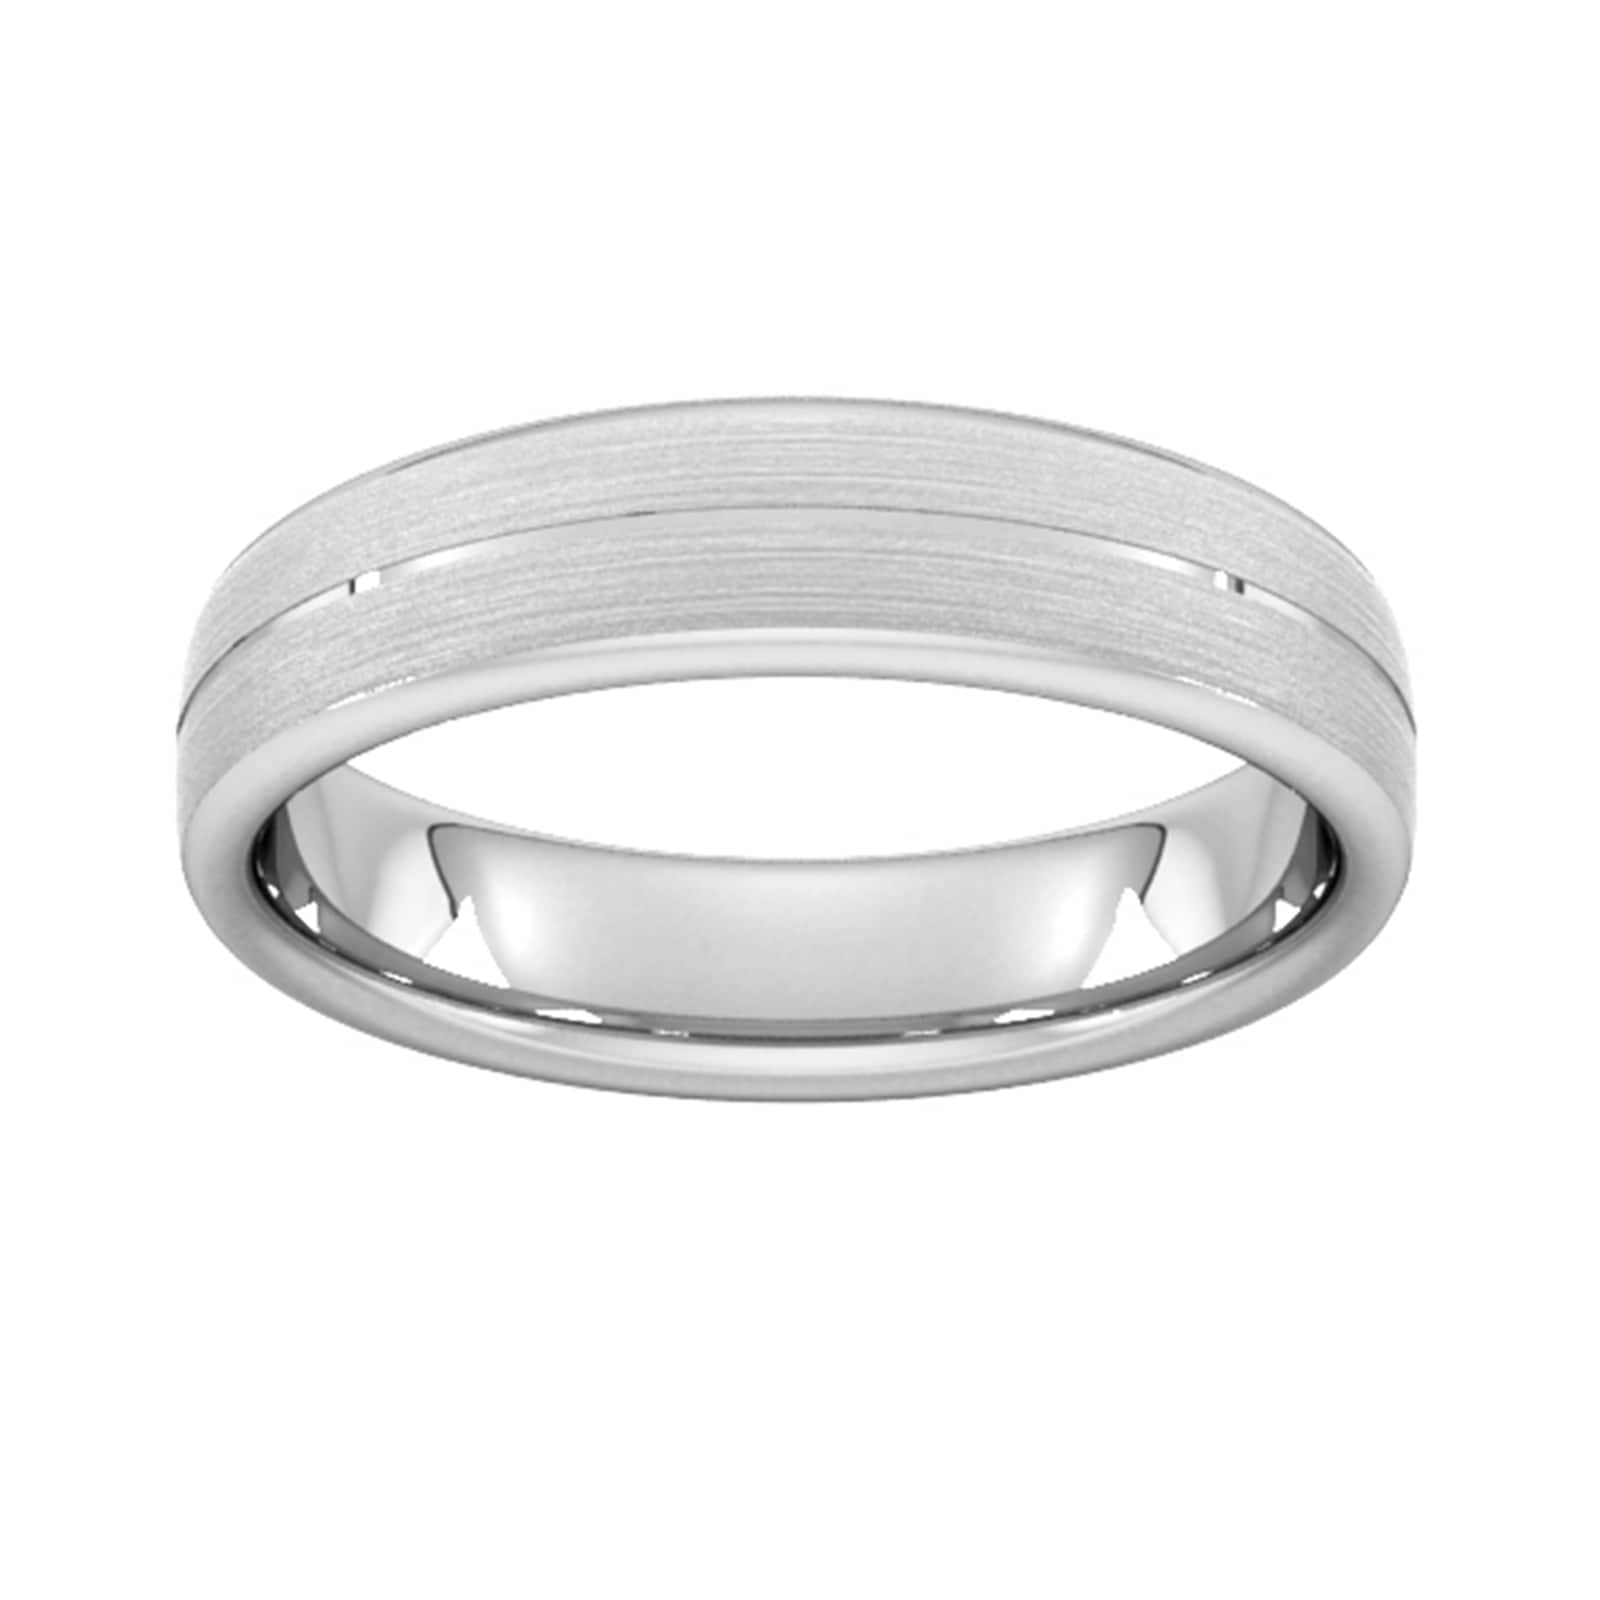 5mm Traditional Court Standard Centre Groove With Chamfered Edge Wedding Ring In 9 Carat White Gold - Ring Size U